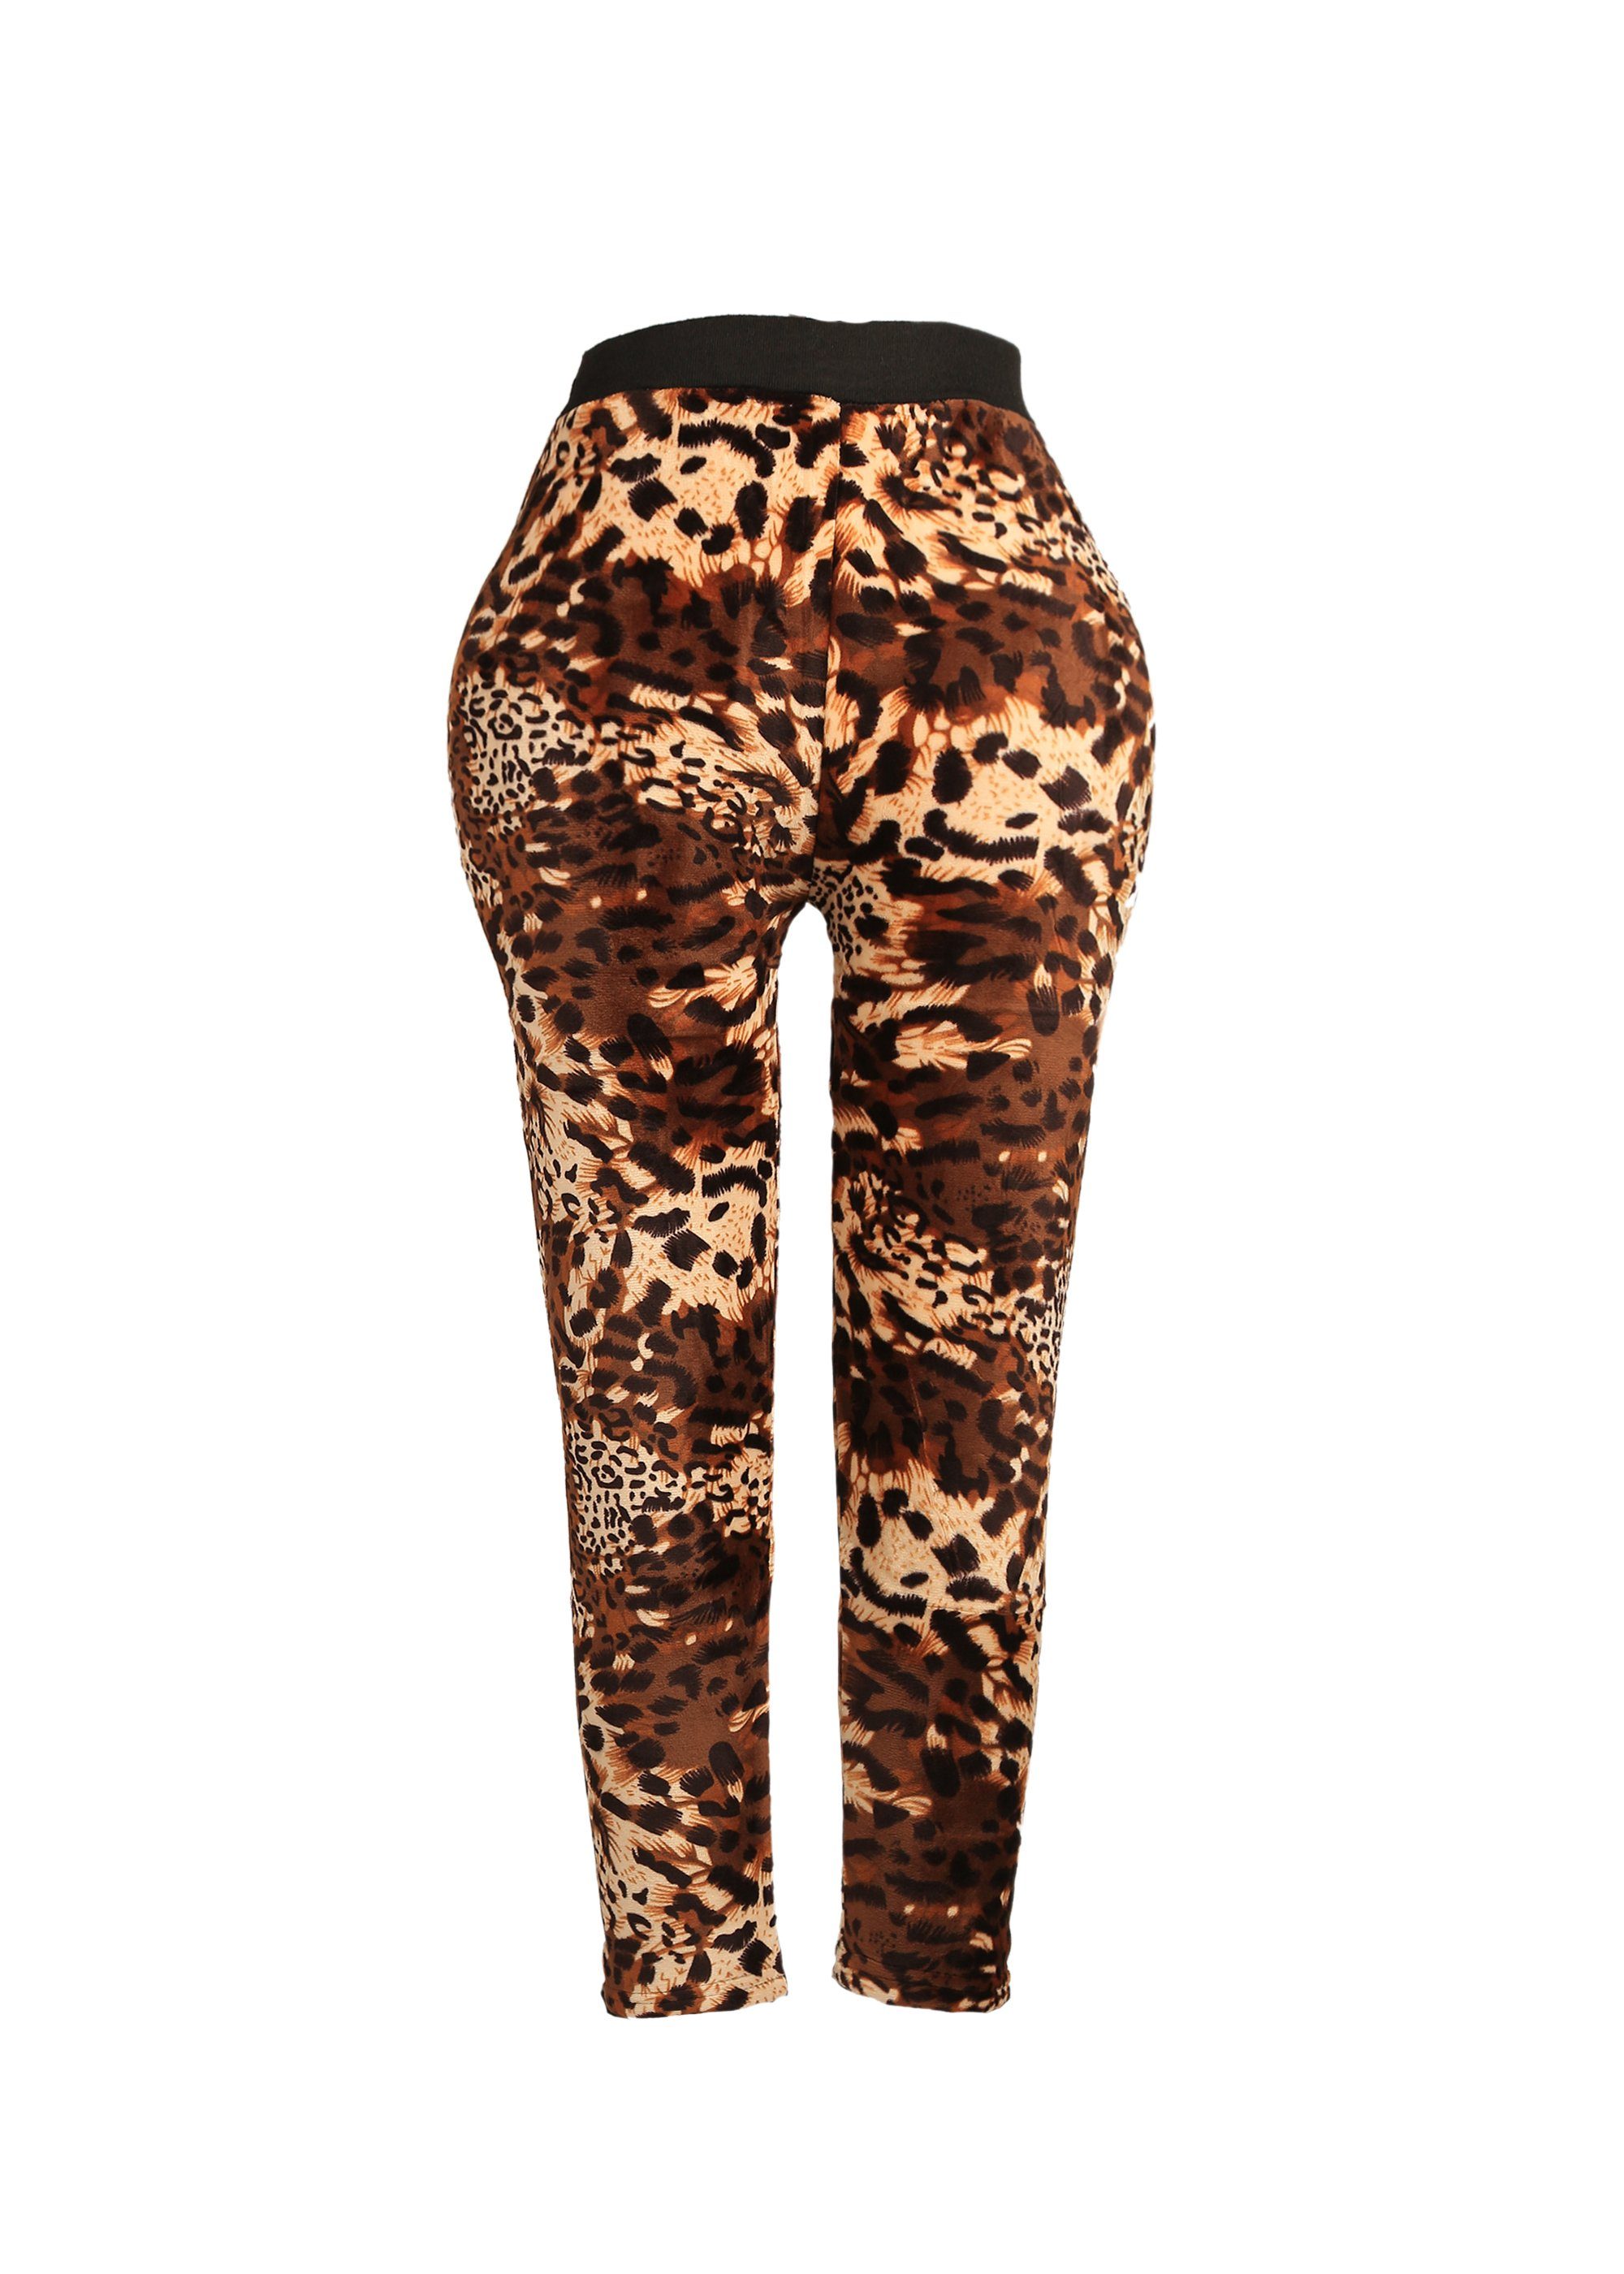 coolem mit Thermoleggings Family Leopardenmuster Trends